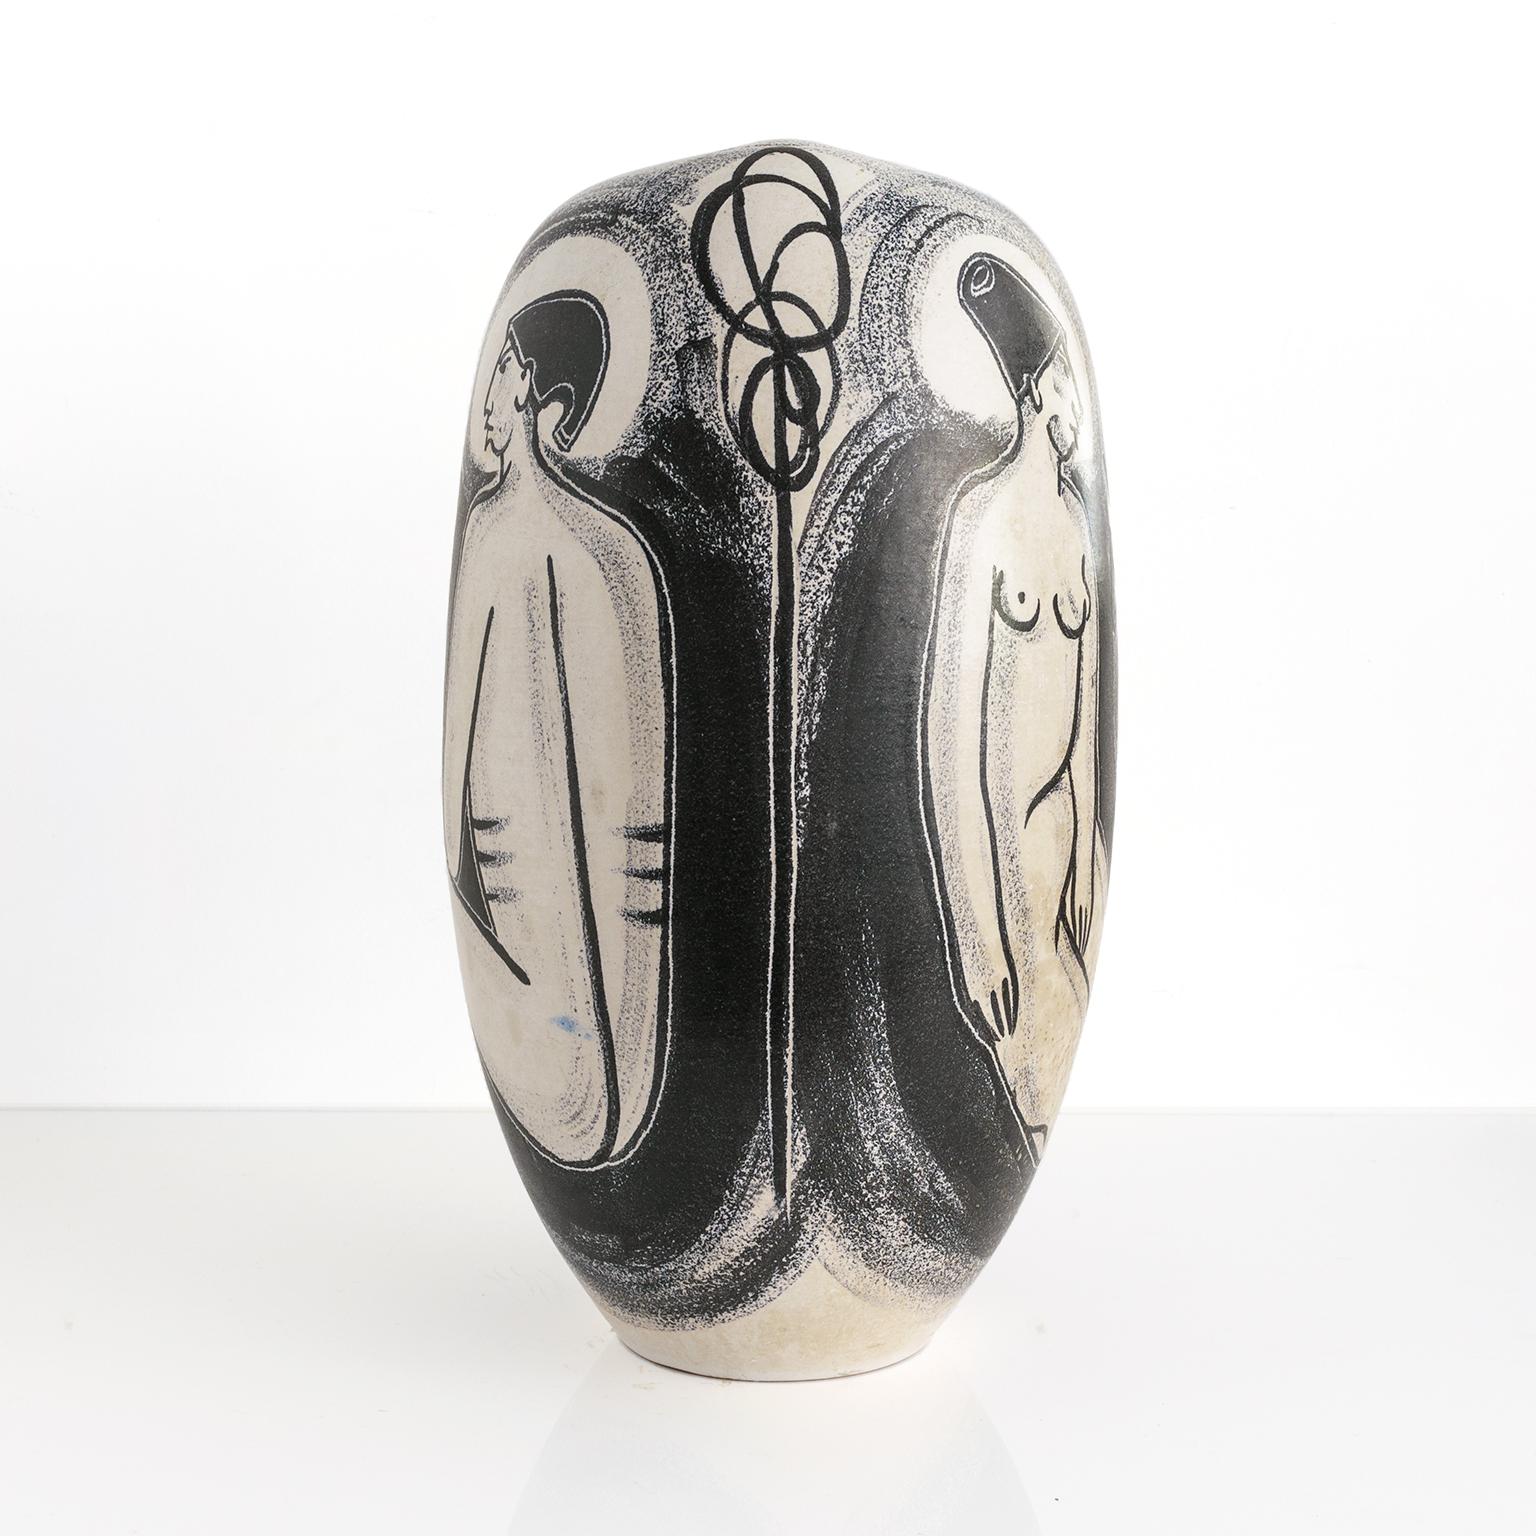 Mette Doller Hand Decorated Scandinavian Modern Vase with Seated Women 1950's In Good Condition For Sale In New York, NY